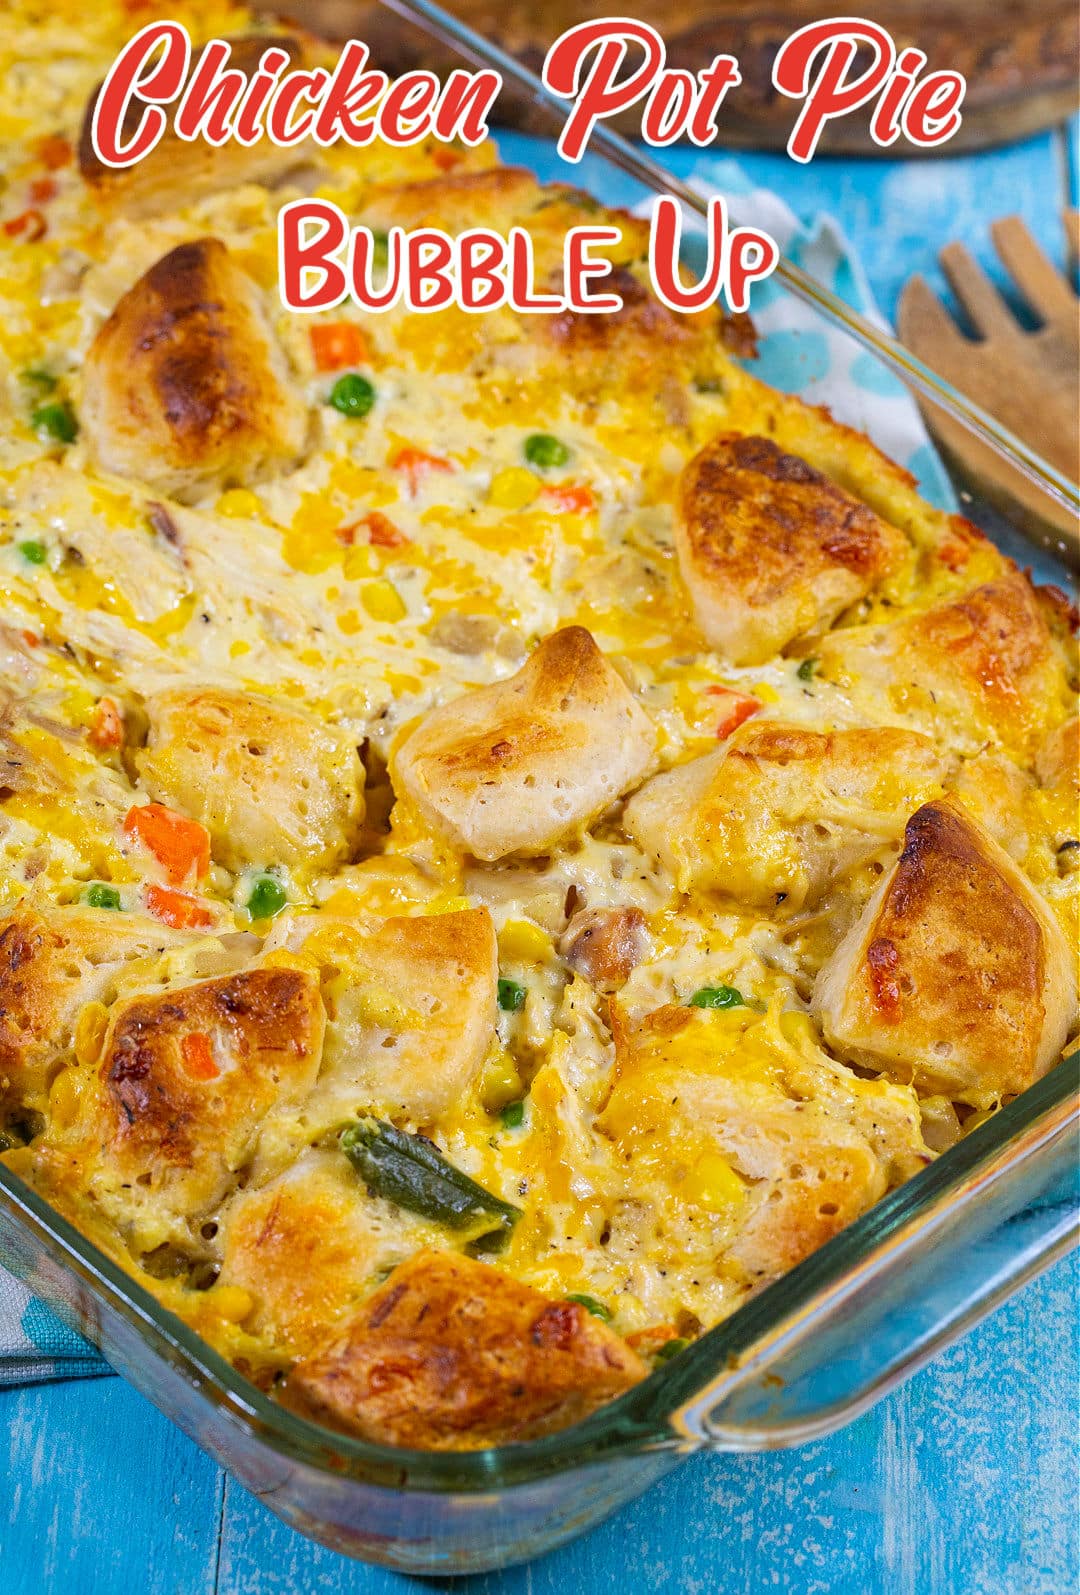 Chicken Pot Pie Bubble Up in baking dish.